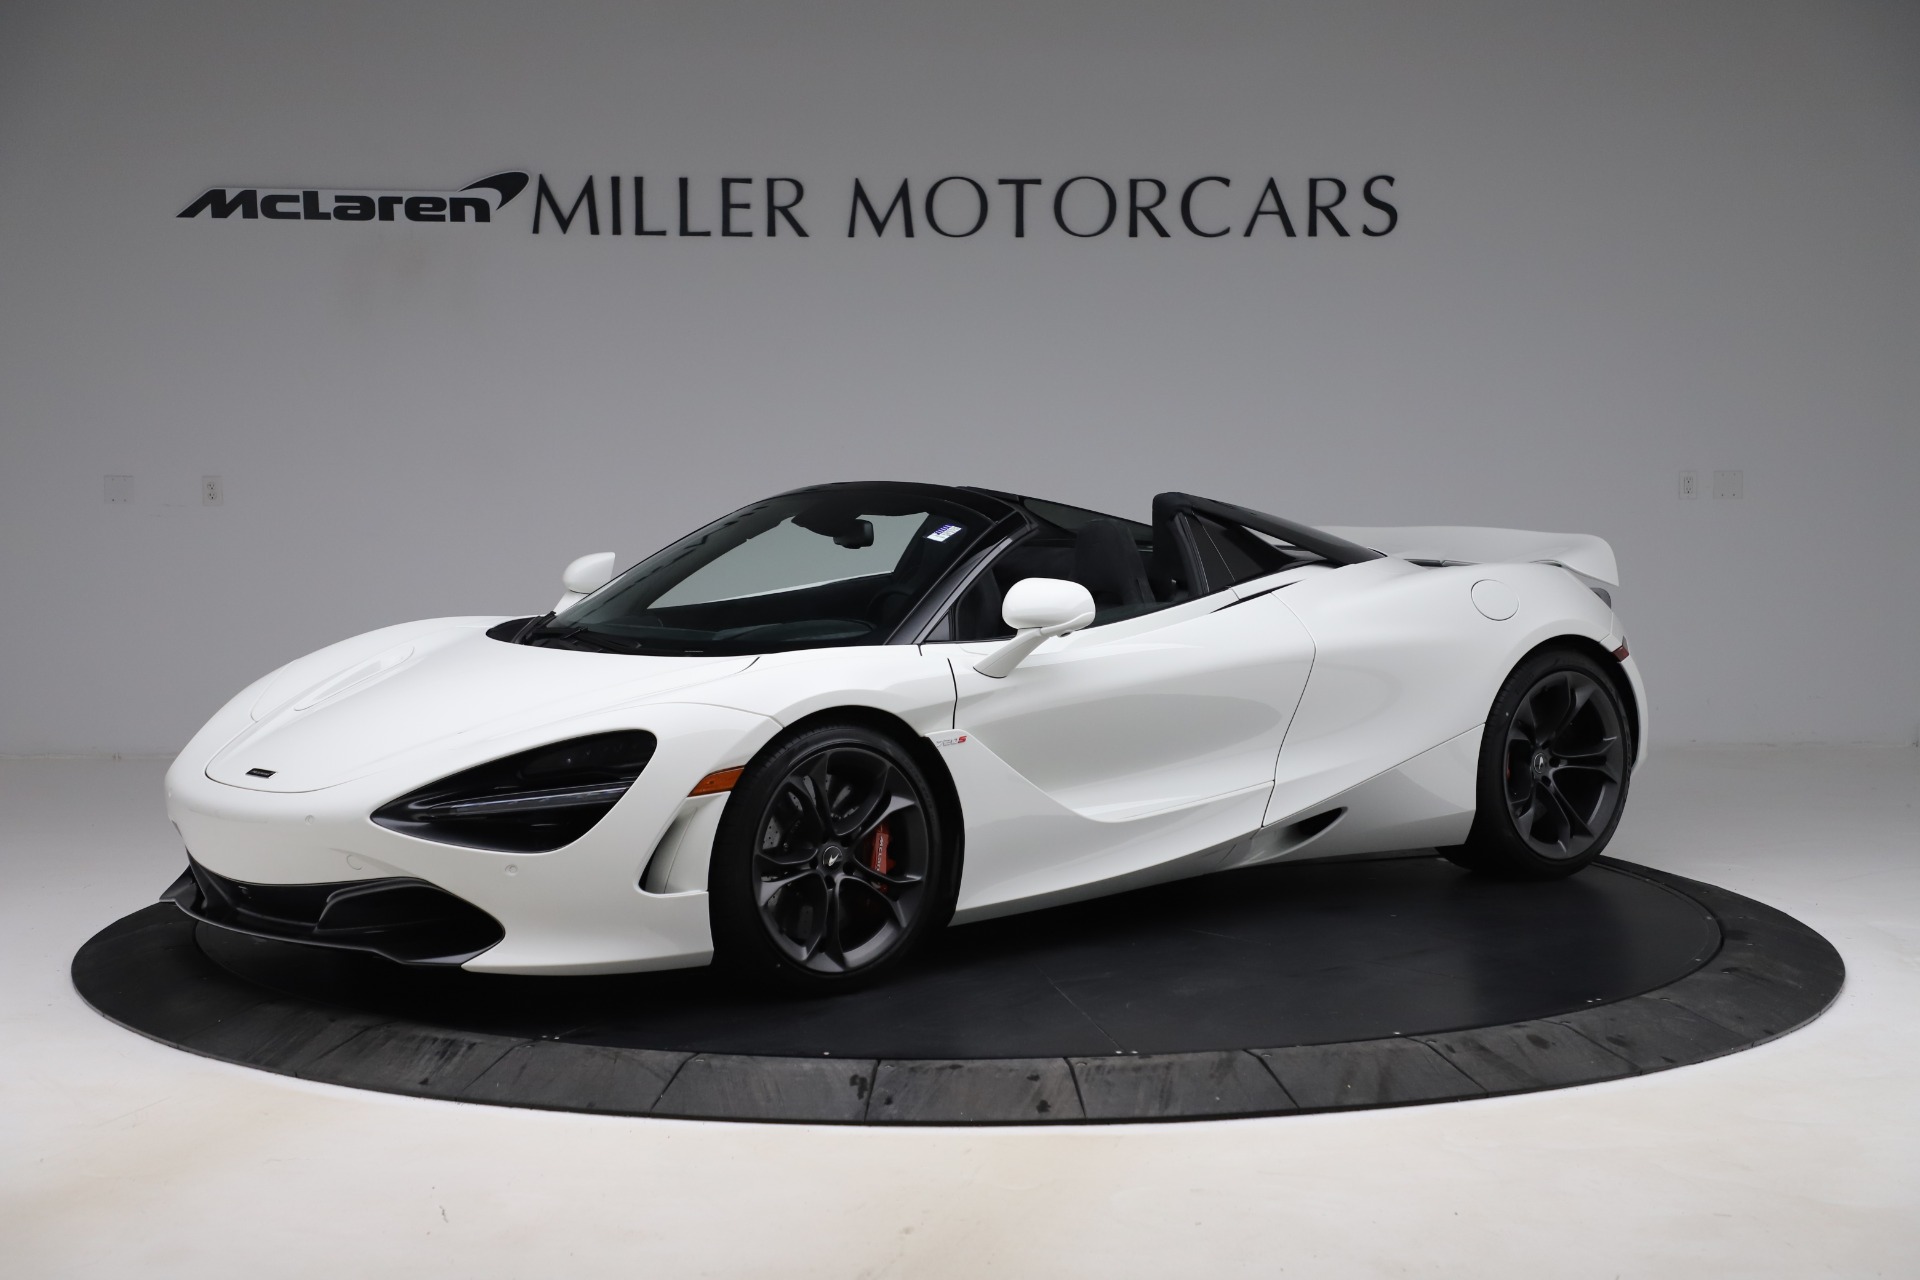 Used 2020 McLaren 720S Spider for sale Sold at Bugatti of Greenwich in Greenwich CT 06830 1